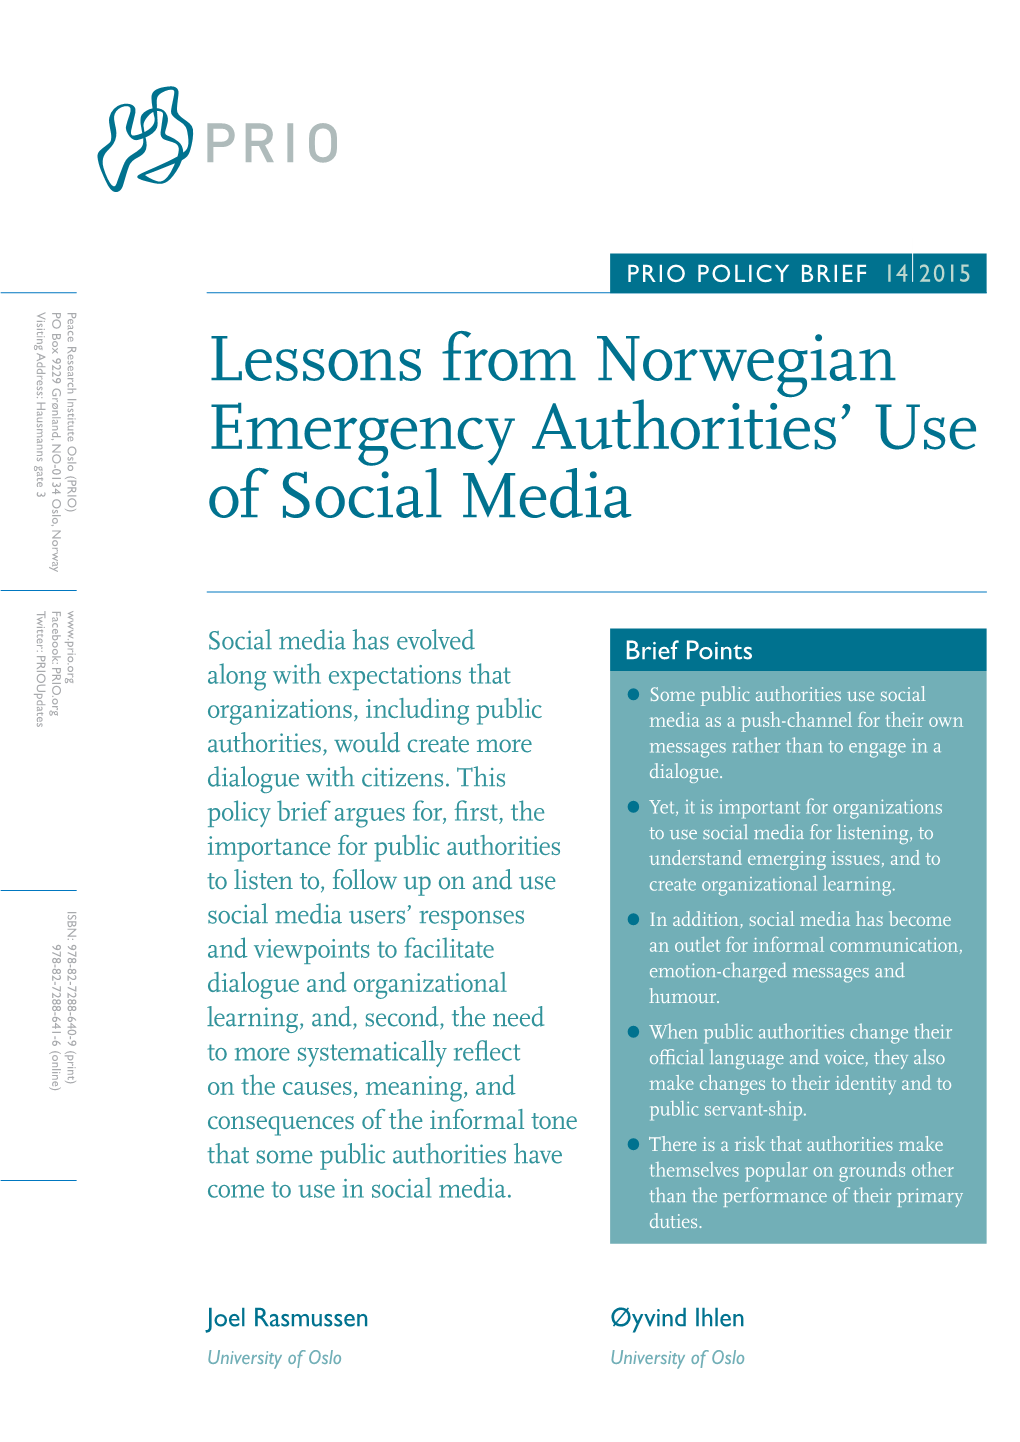 Lessons from Norwegian Emergency Authorities' Use of Social Media